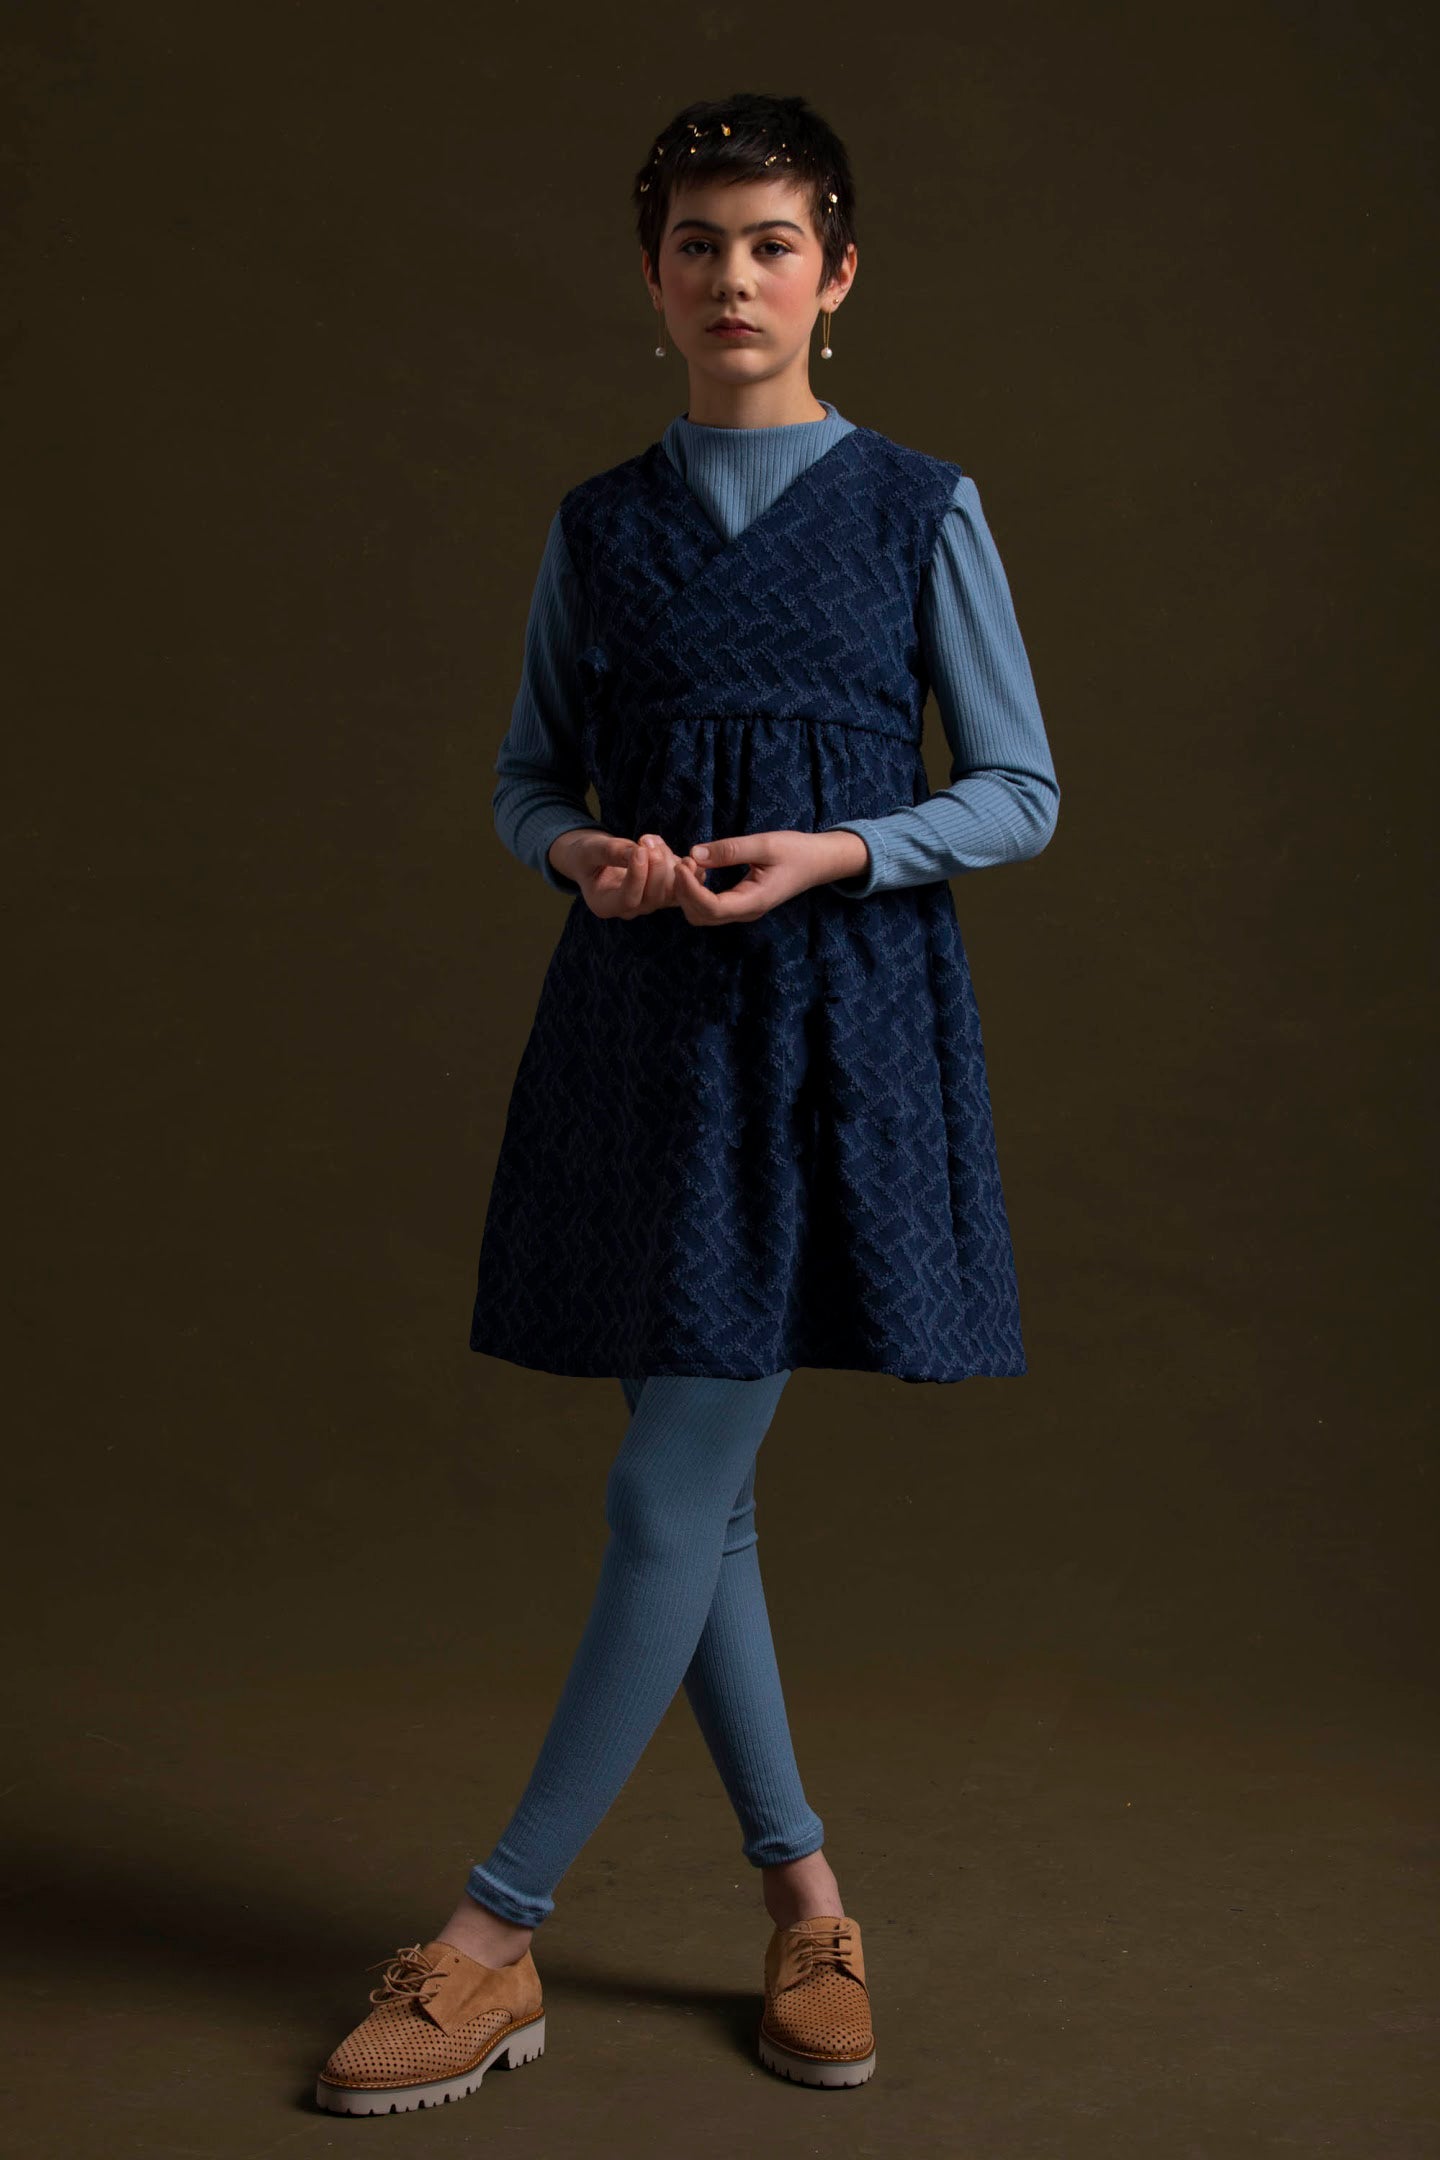 Young lady with pixie cut wears her subtle knife dress paired with blue rib knit tunic and leggings